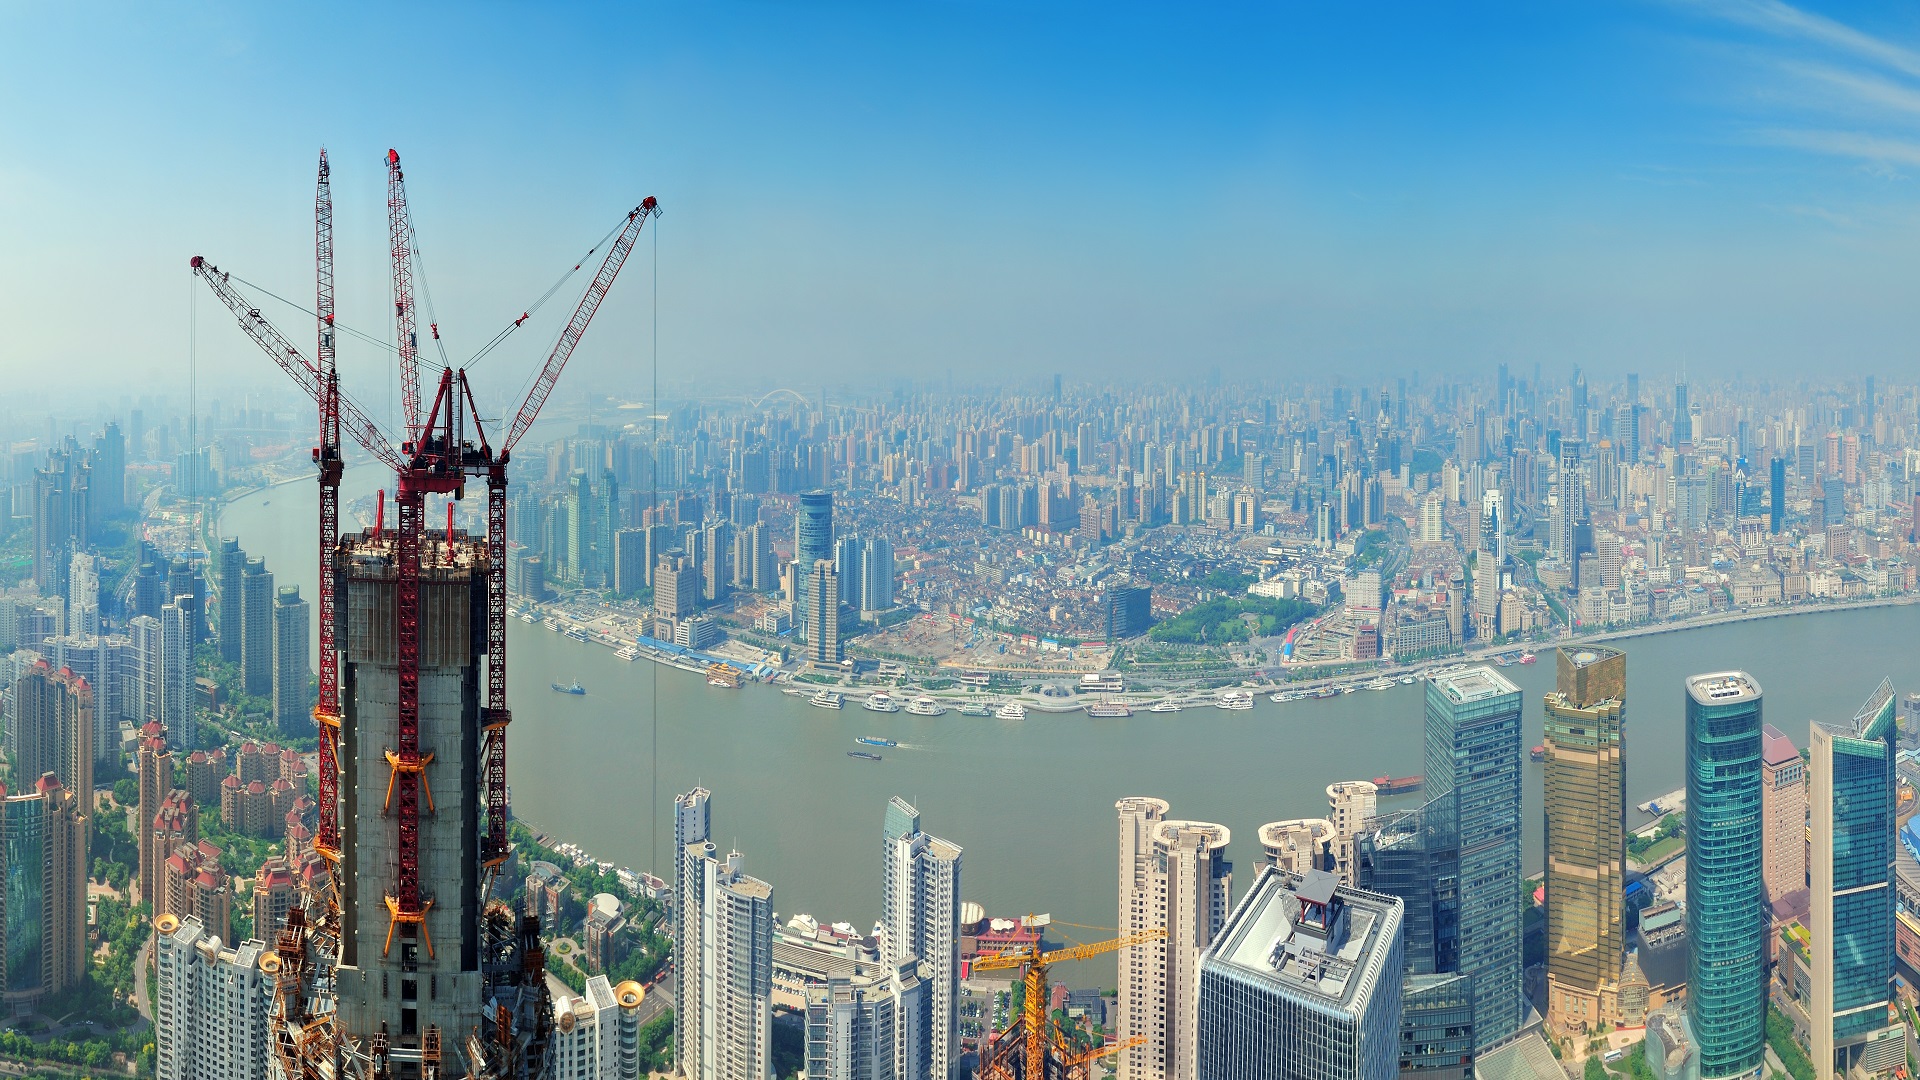 shanghai-urban-city-aerial-panorama-view-with-skyscrapers